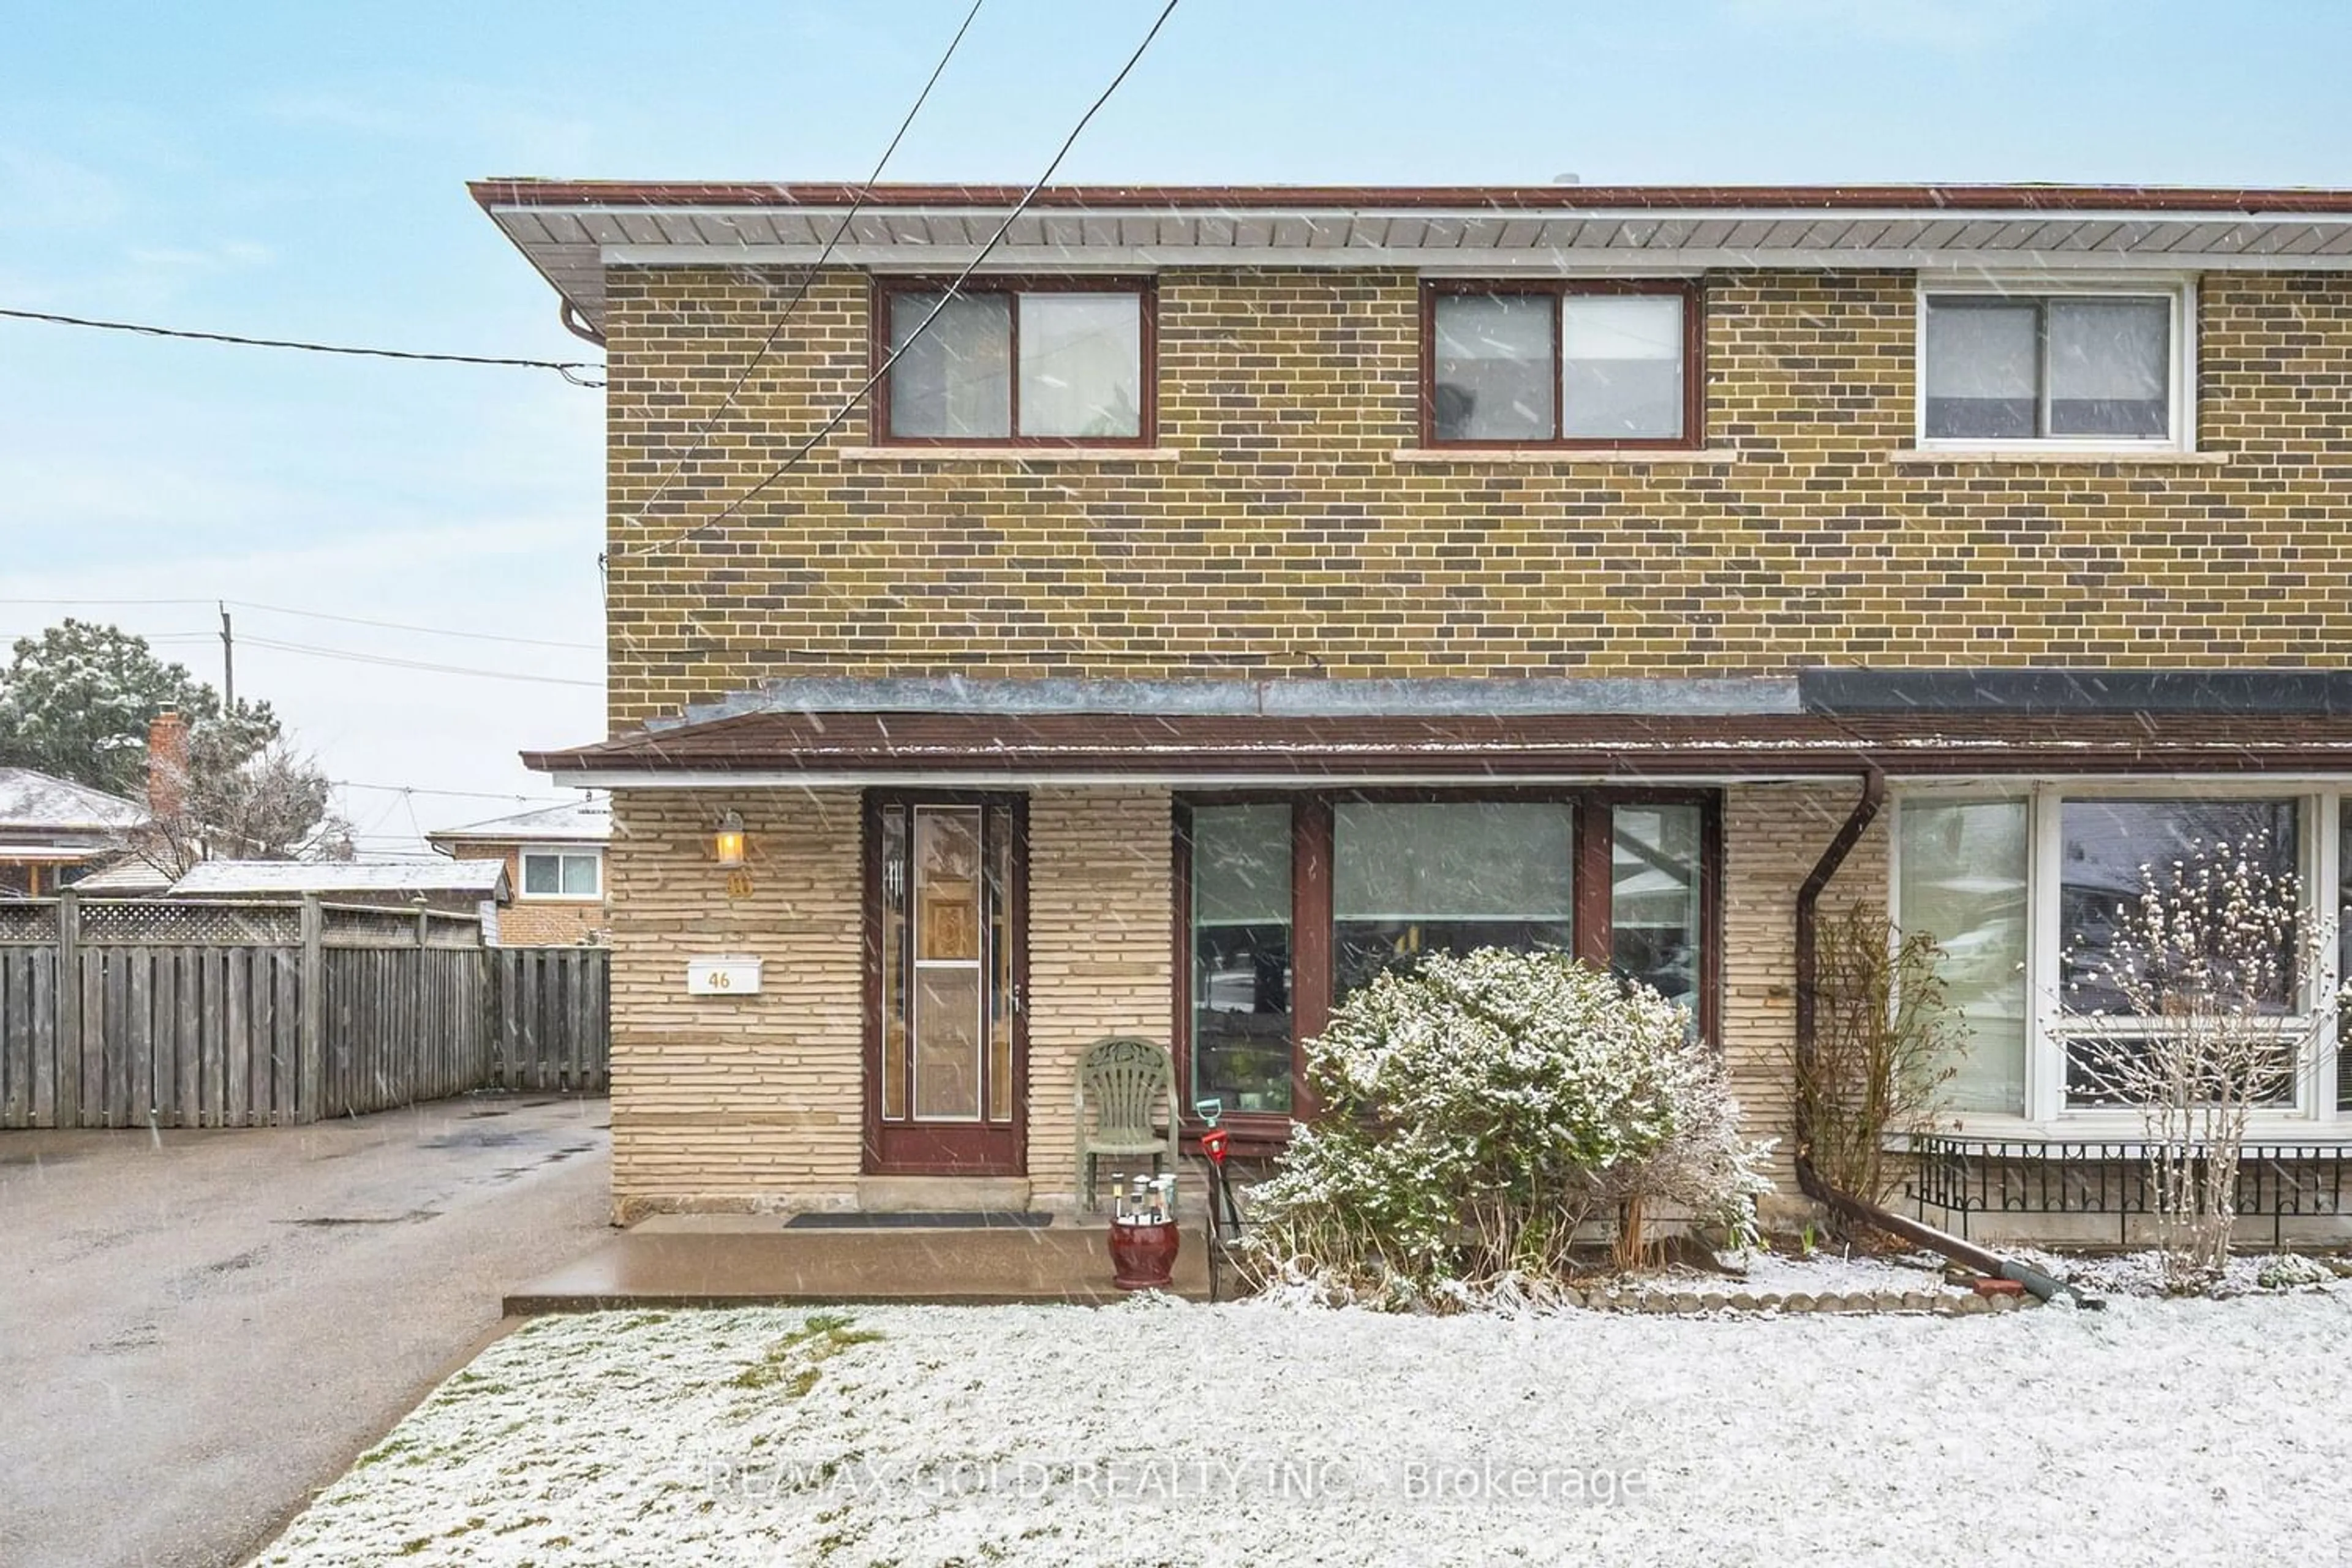 Home with brick exterior material for 46 Goldsboro Rd, Toronto Ontario M9L 1A7